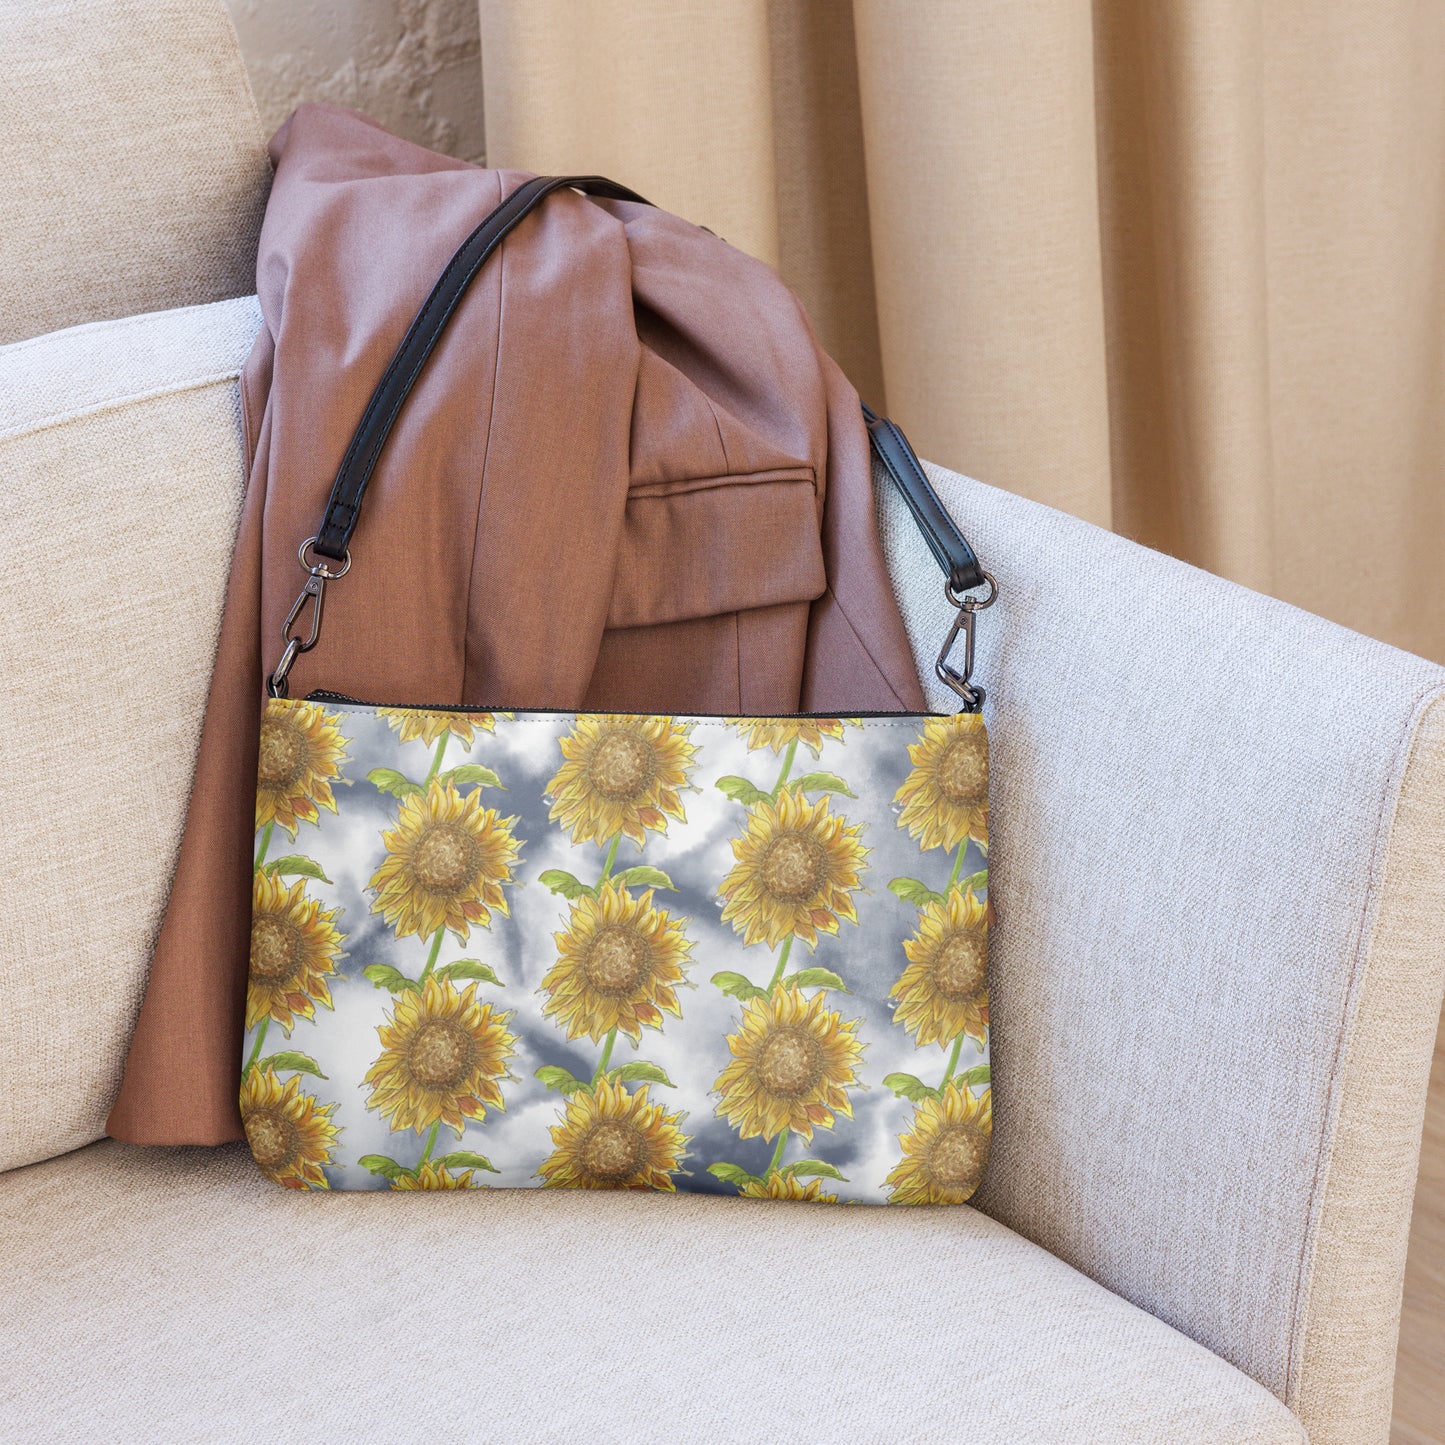 Sunflower crossbody bag. Faux leather with polyester lining and dark grey hardware. Comes with adjustable removable wrist and shoulder straps. Features patterned design of watercolor sunflowers against a cloudy background. Shown on couch by leather jacket.